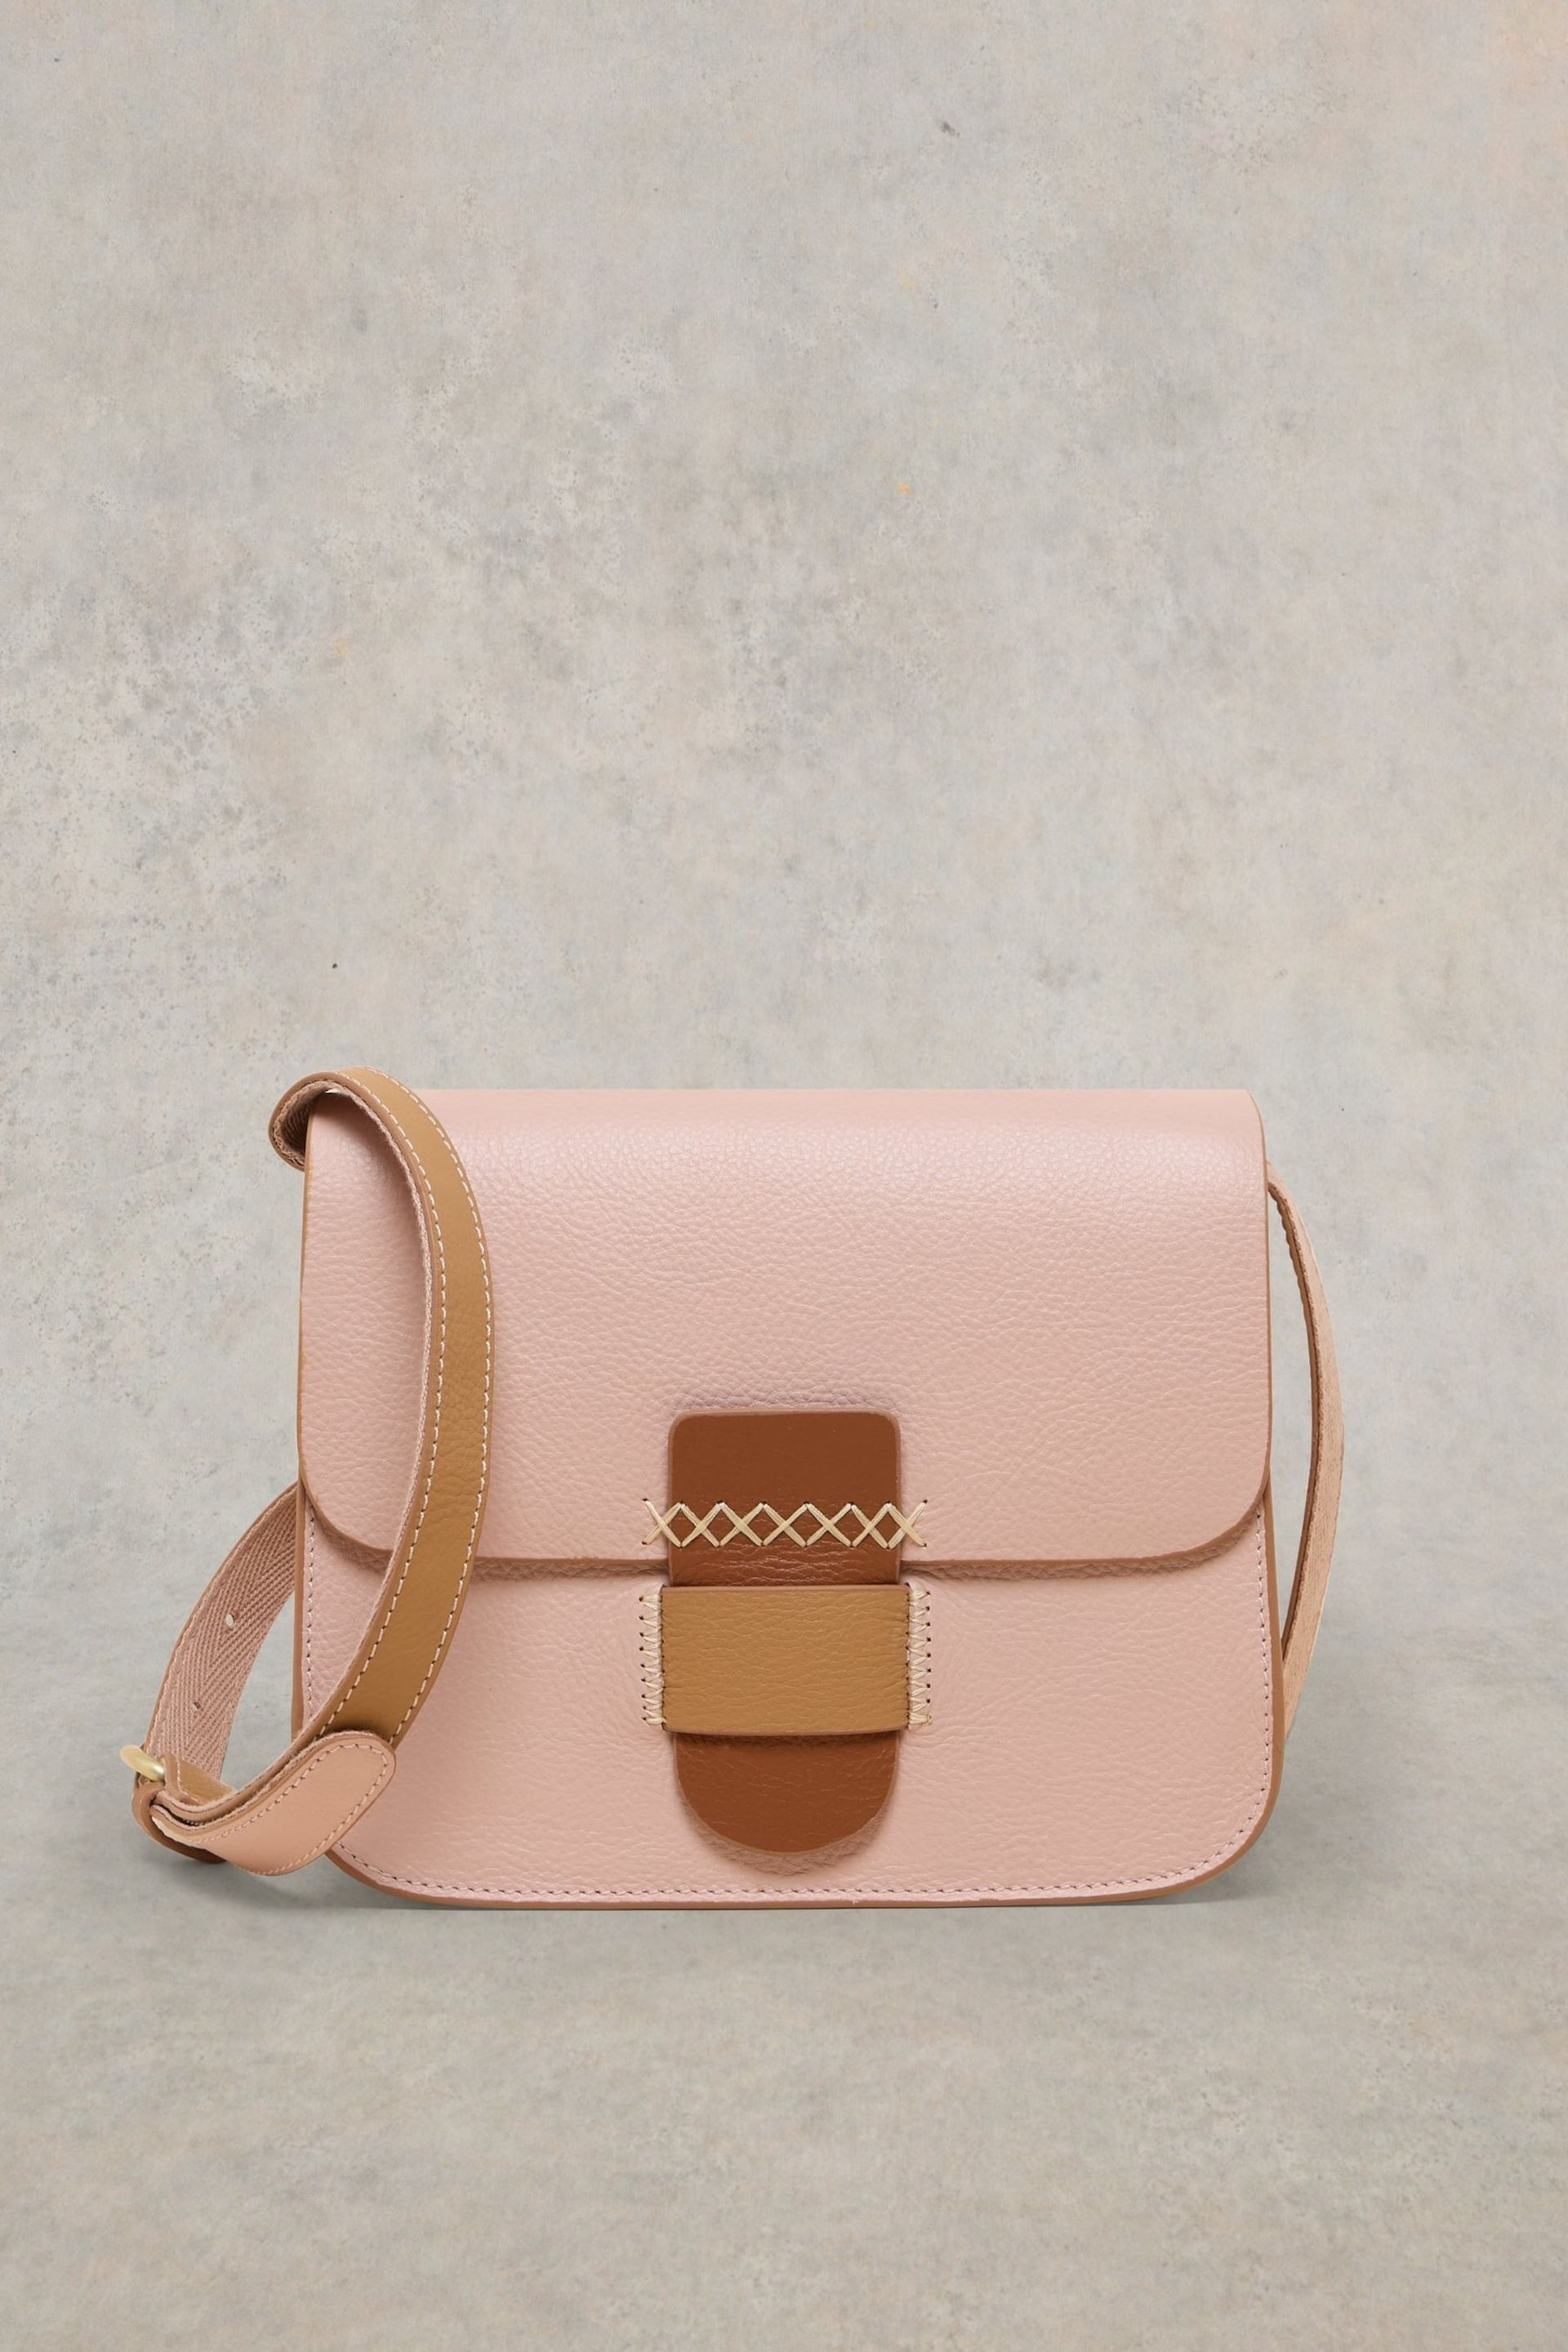 White Stuff Pink Evie Leather Satchel Bag - Image 1 of 4